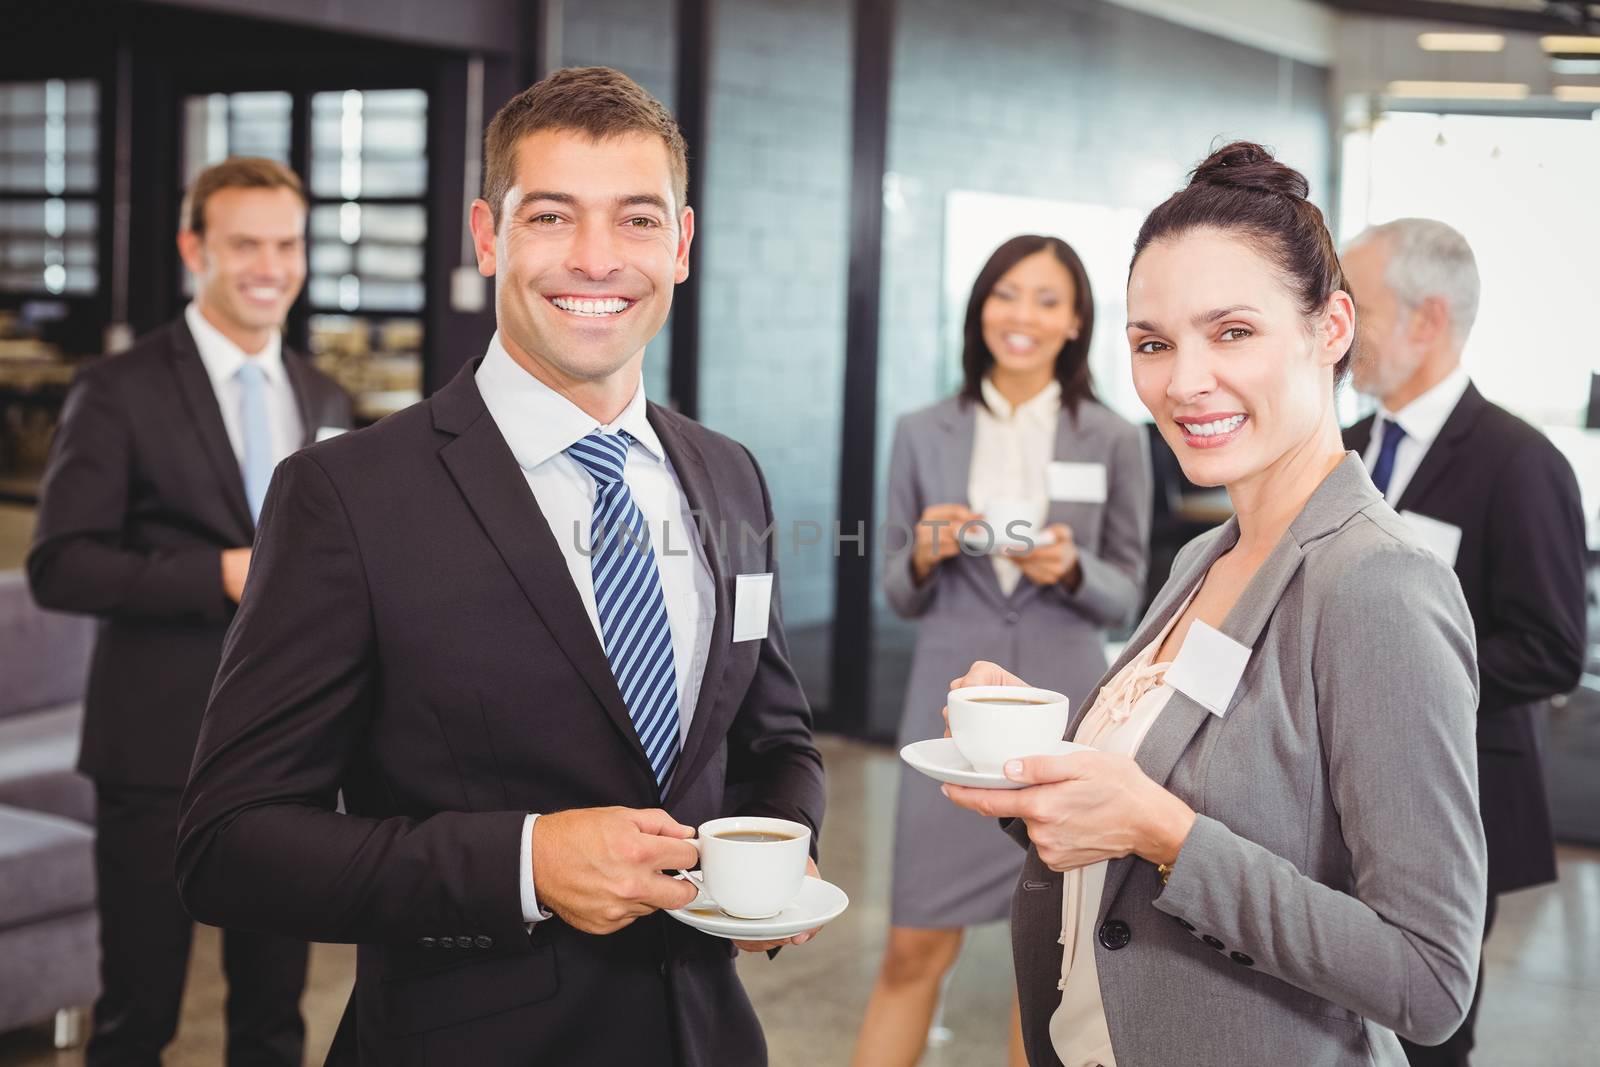 Portrait of businesspeople having tea and interacting during break time in office